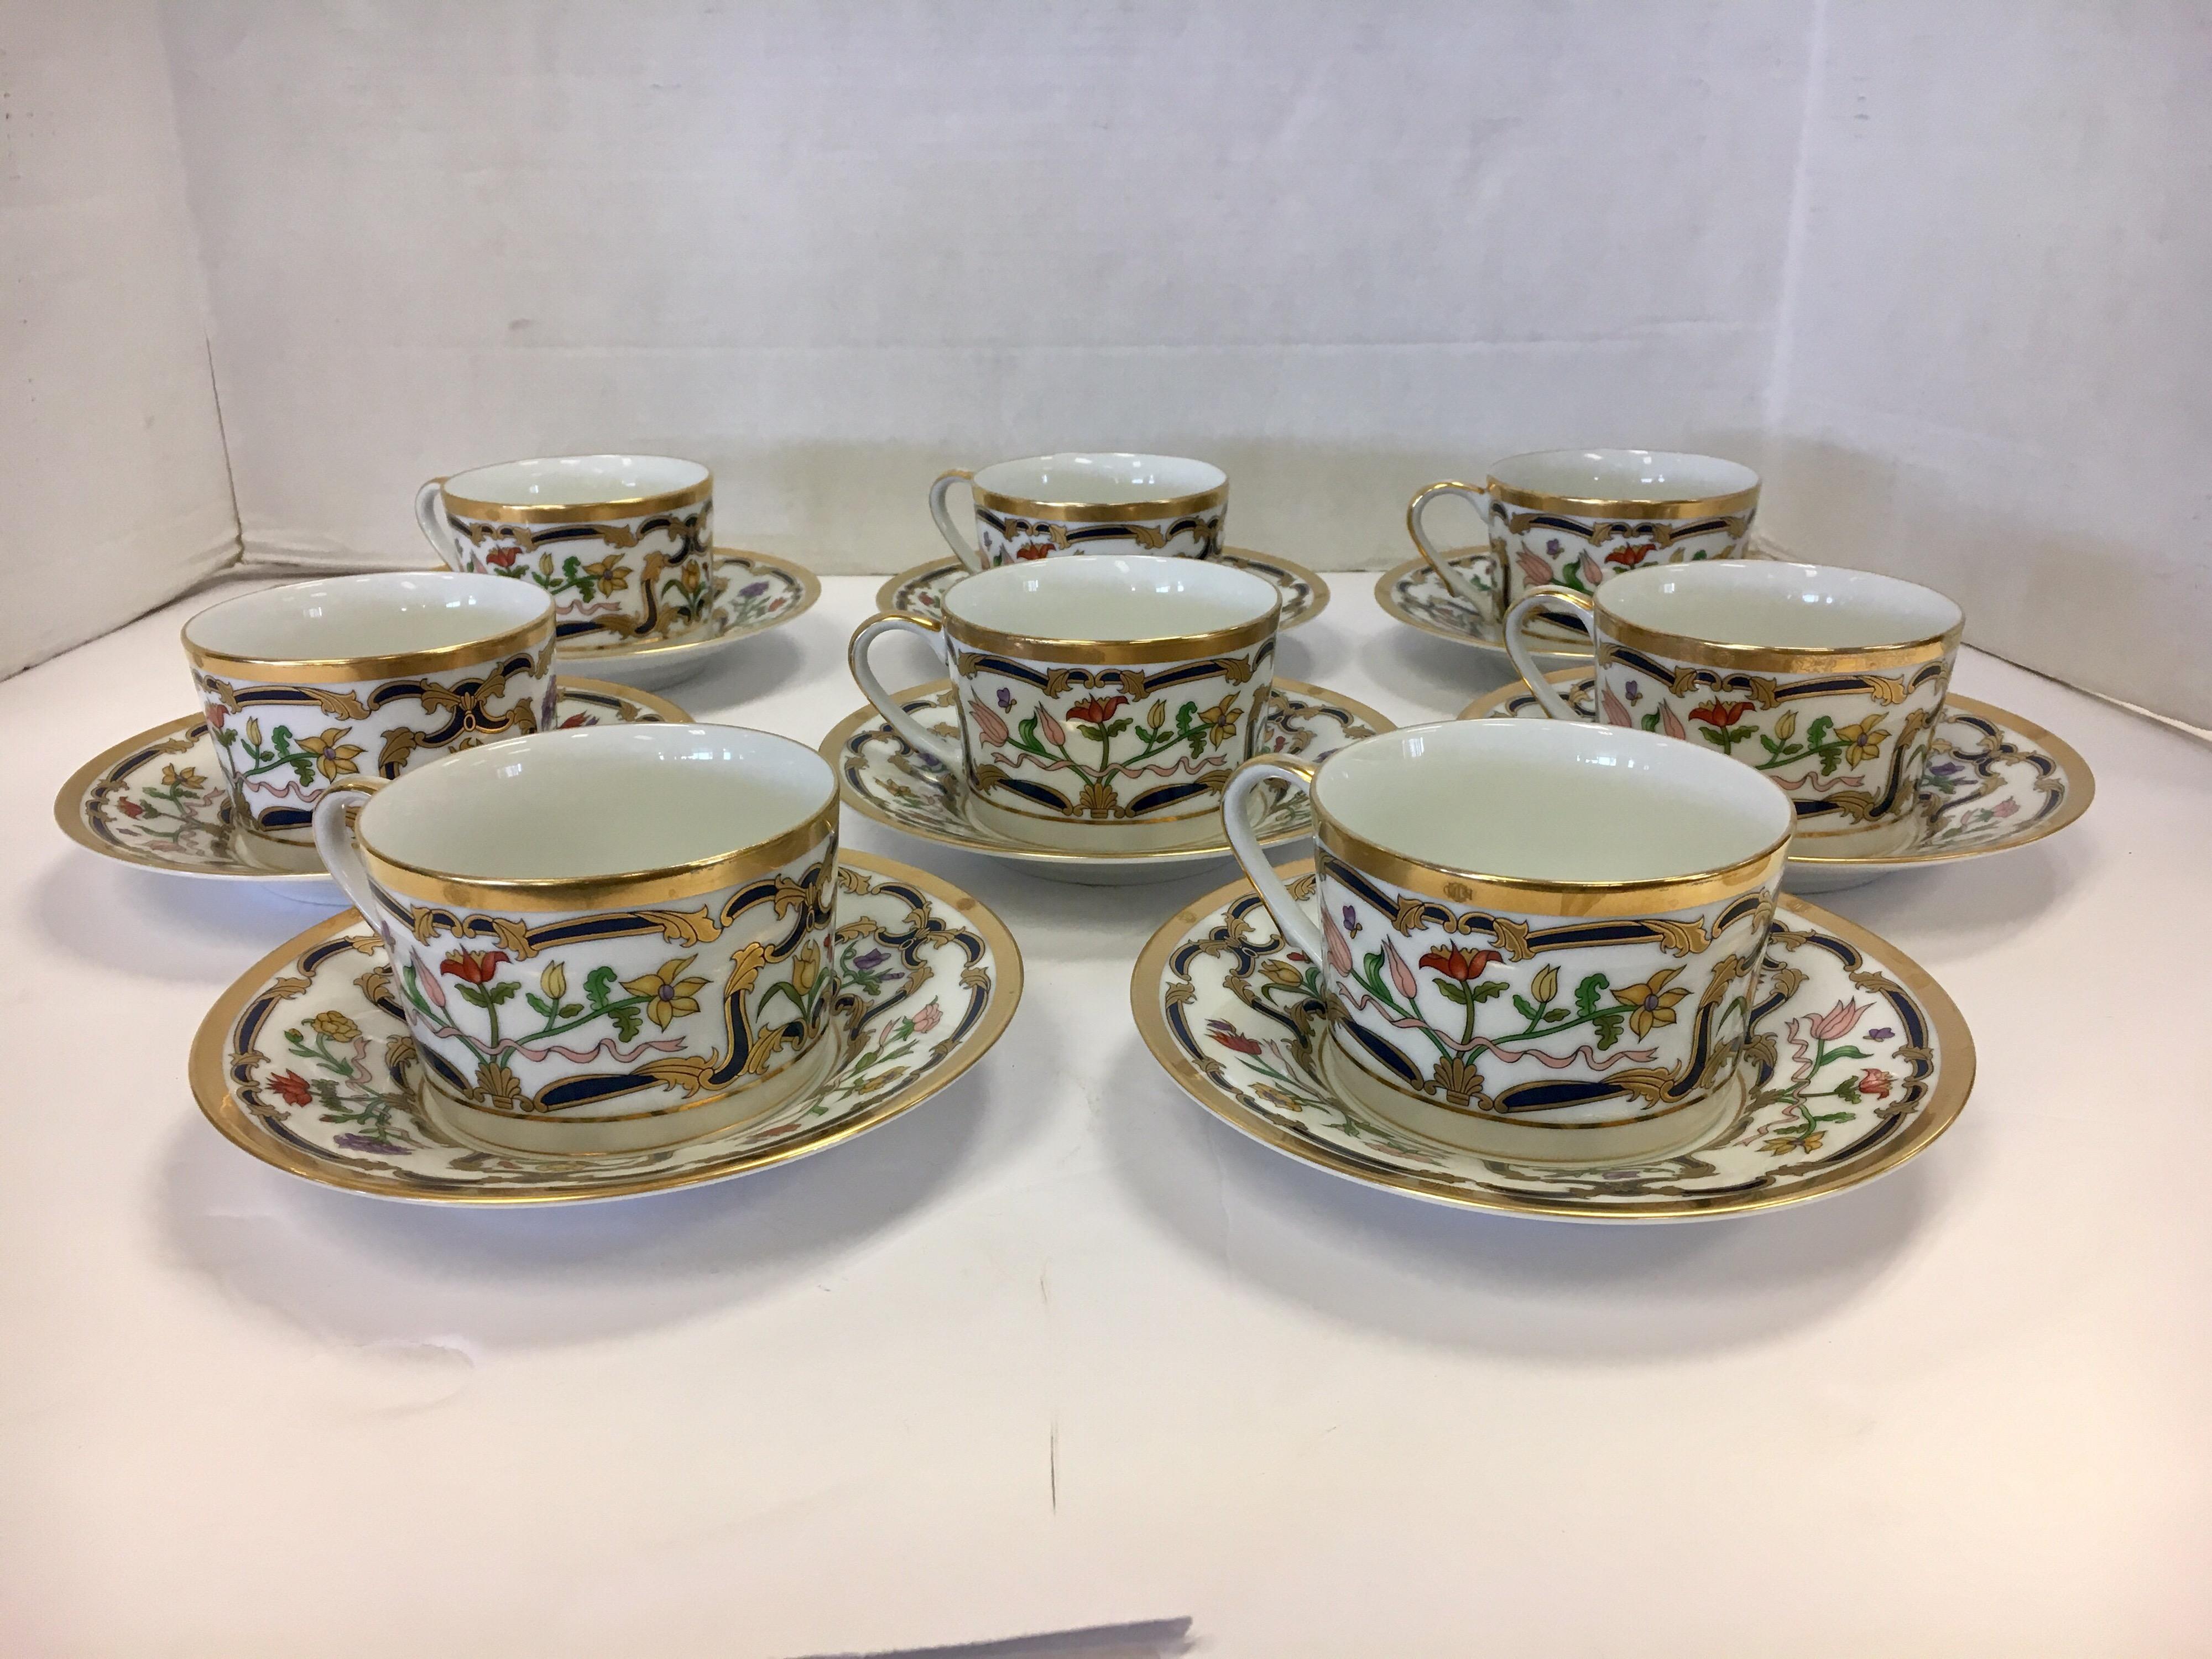 A total of sixteen rare, Christian Dior teacups and saucers, eight of each. The style is Renaissance. The teacups have an opening at the top of 3.5